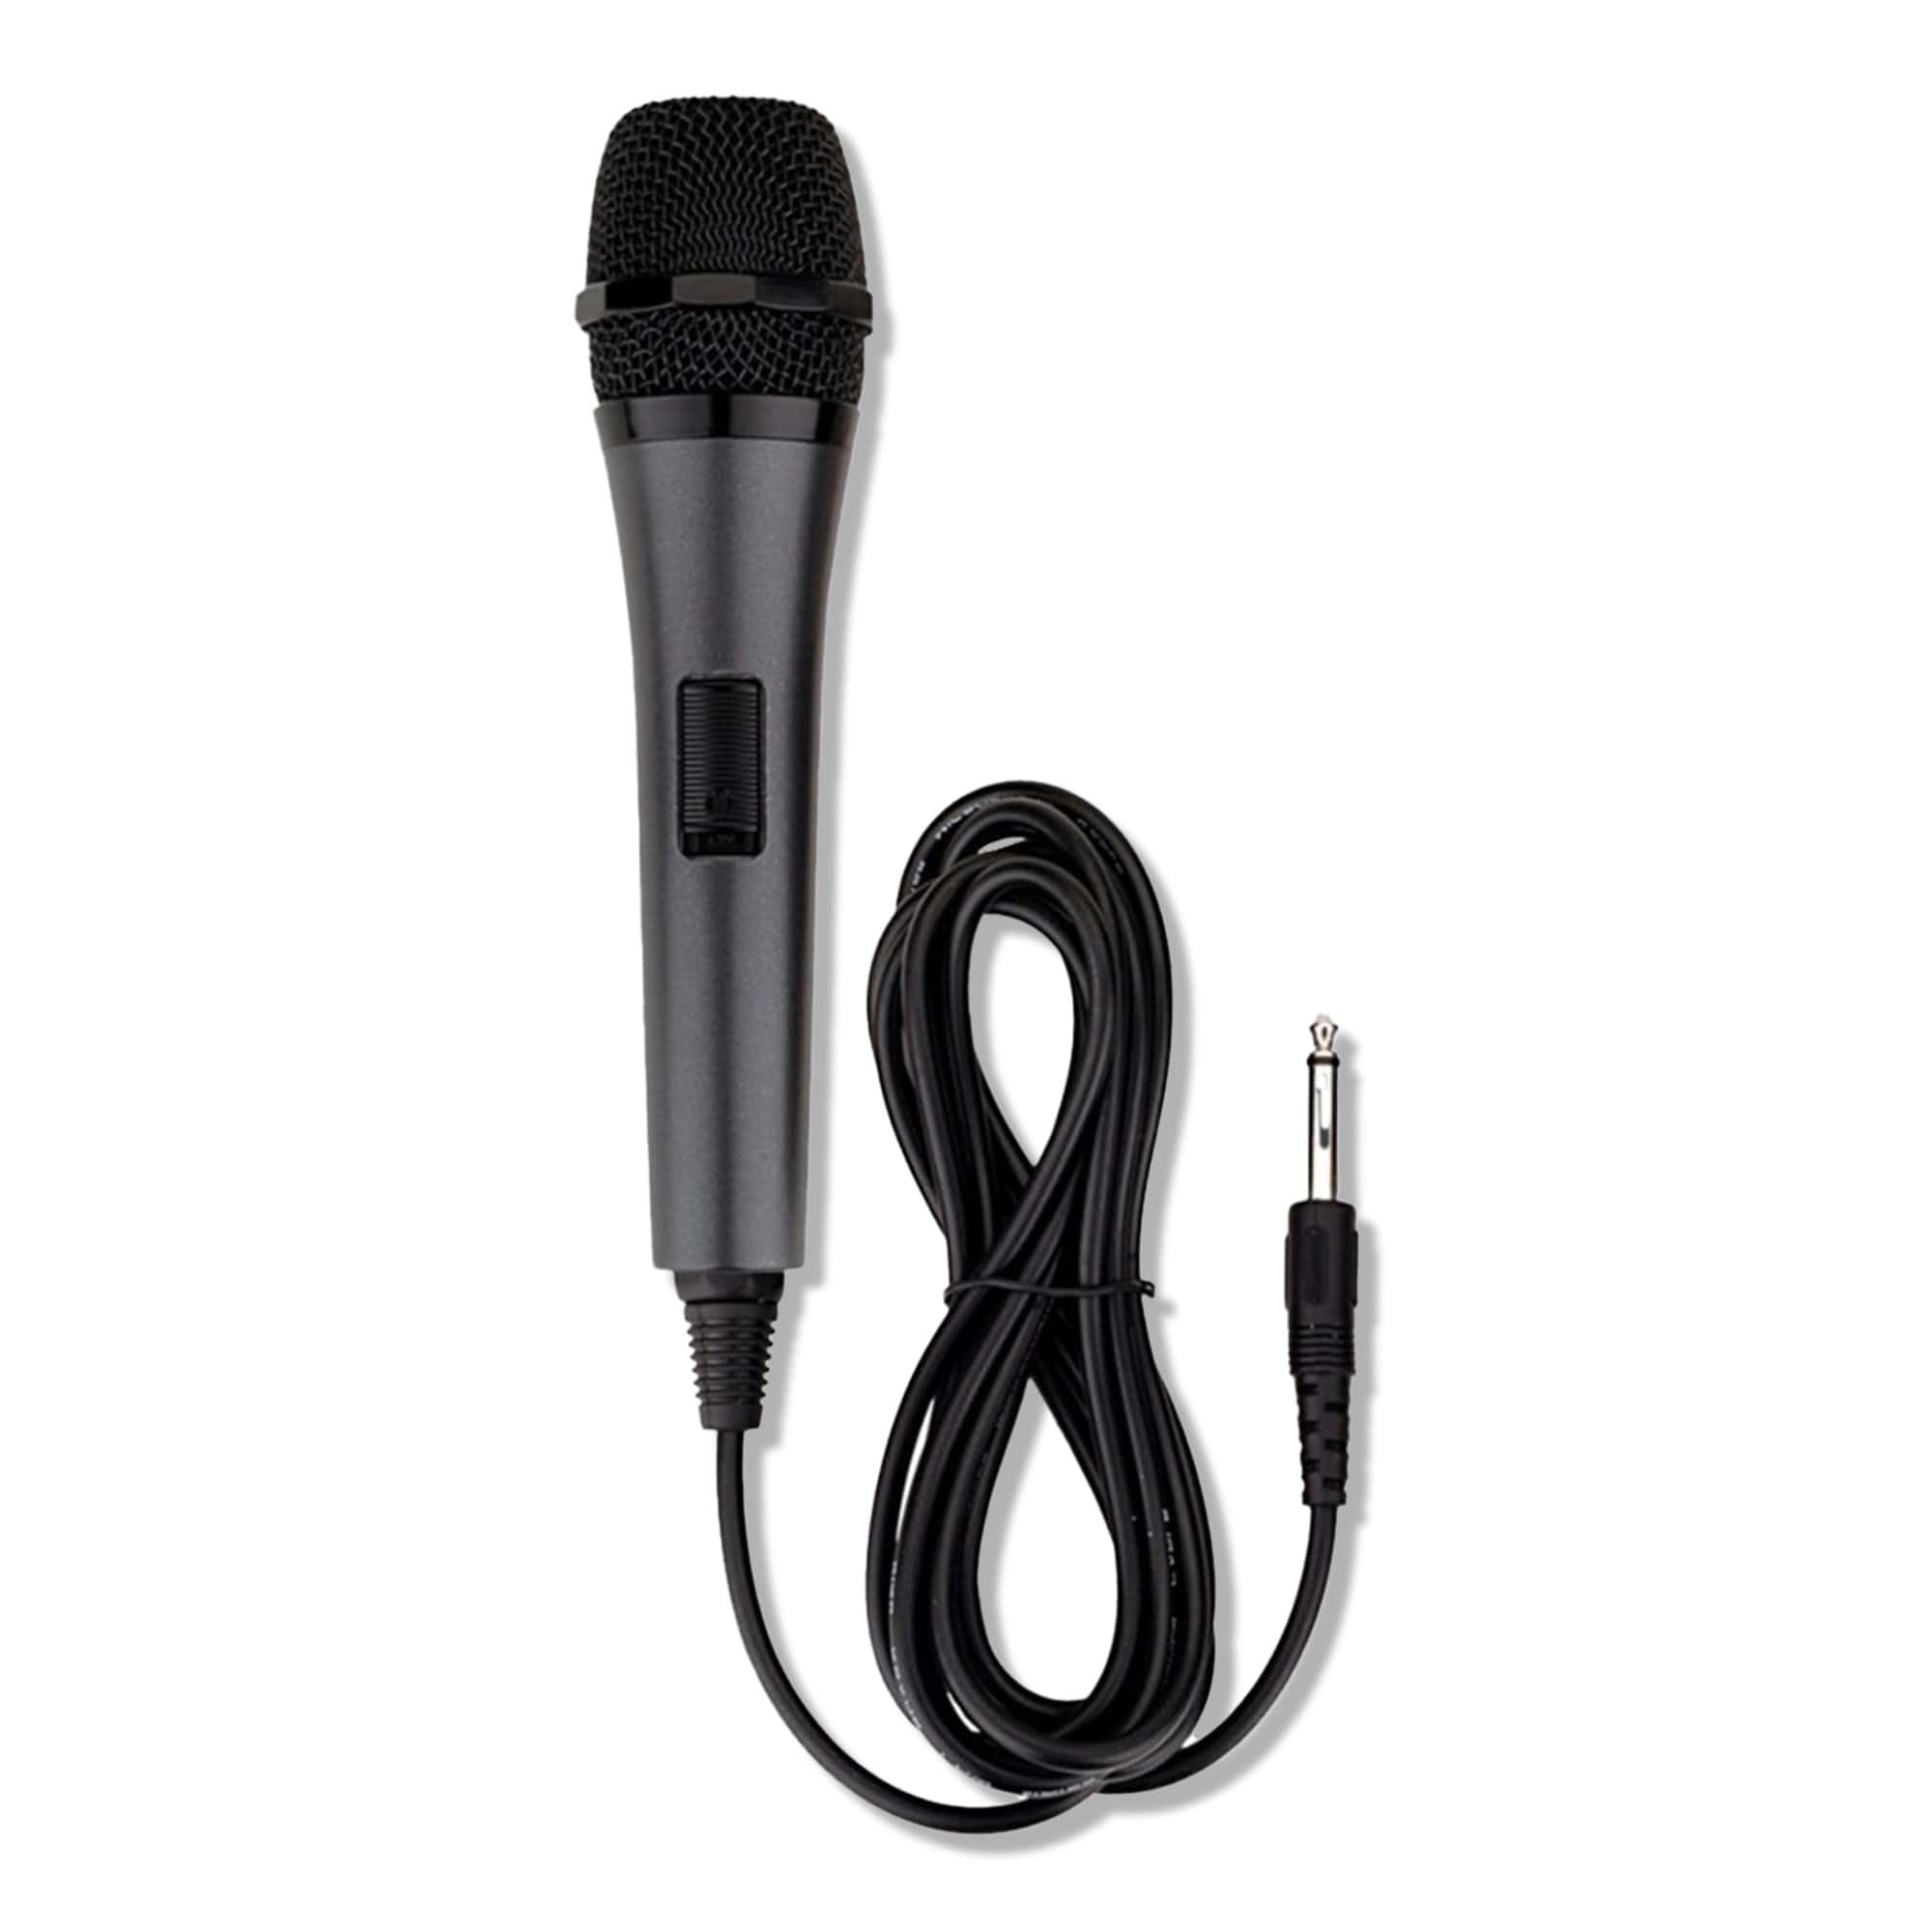 10.5' The Singing Machine Unidirectional Microphone w/ 6.3mm Plug & 3.5mm Adapter (Black or Pink) $2.83 + Free Shipping w/ Prime or on $35+